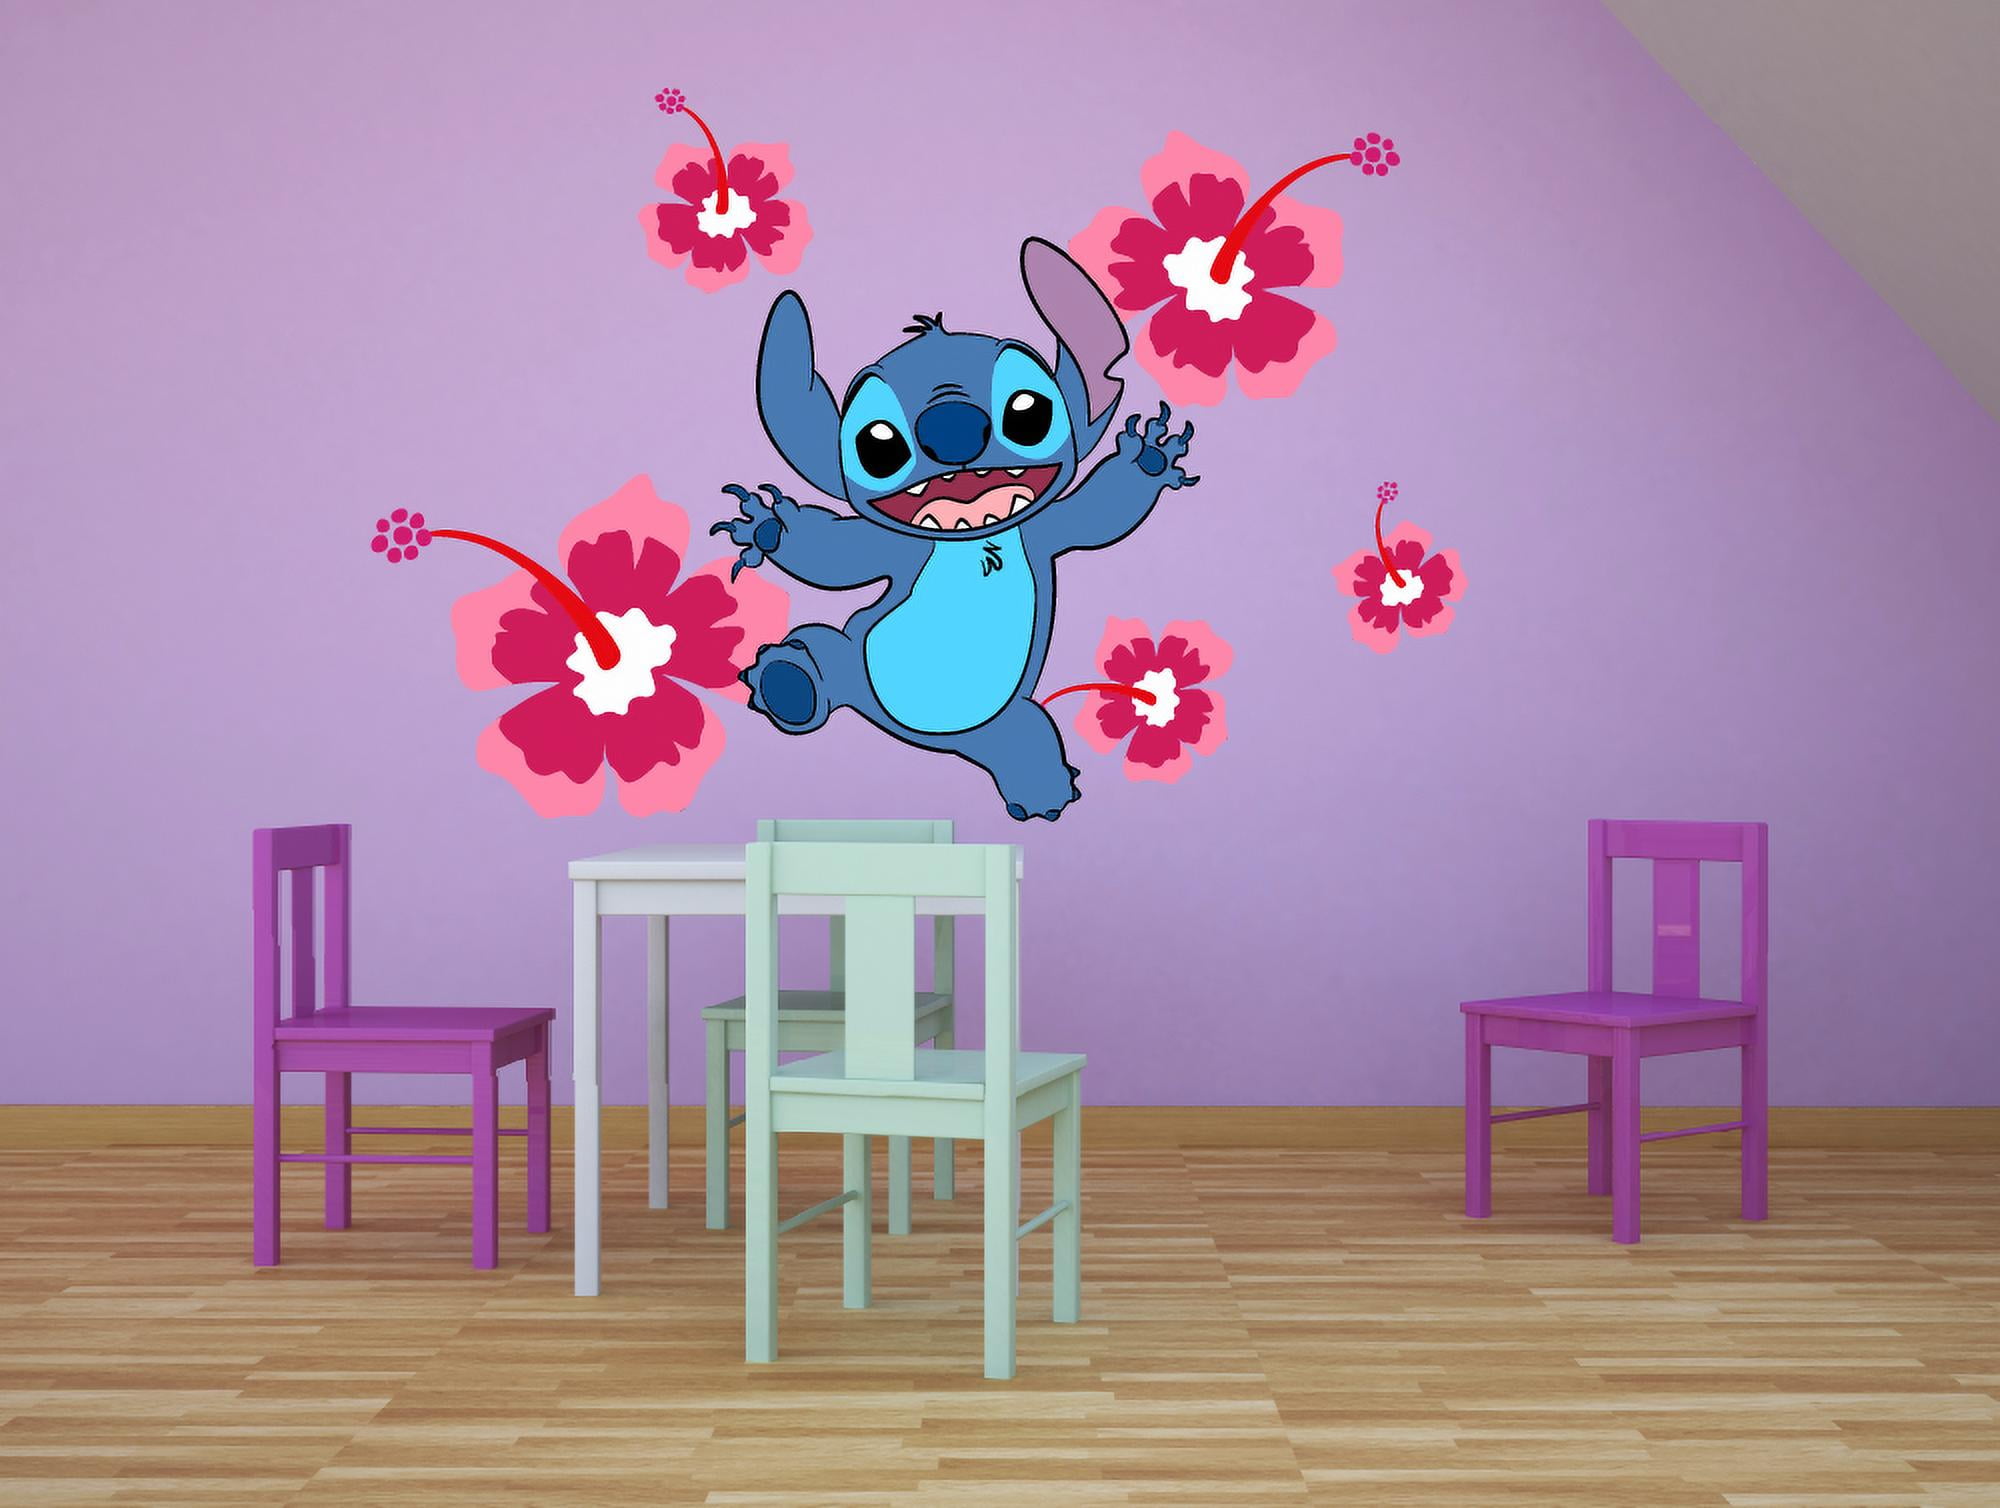 Lilo and Stitch Disney Cartoon Character Wall Art Graphic Decal Sticker  Vinyl Mural Baby Kids Room Bedroom Nursery Kindergarten School House Home  Wall Art Design Removable Peel and Stick 10x8 inch -